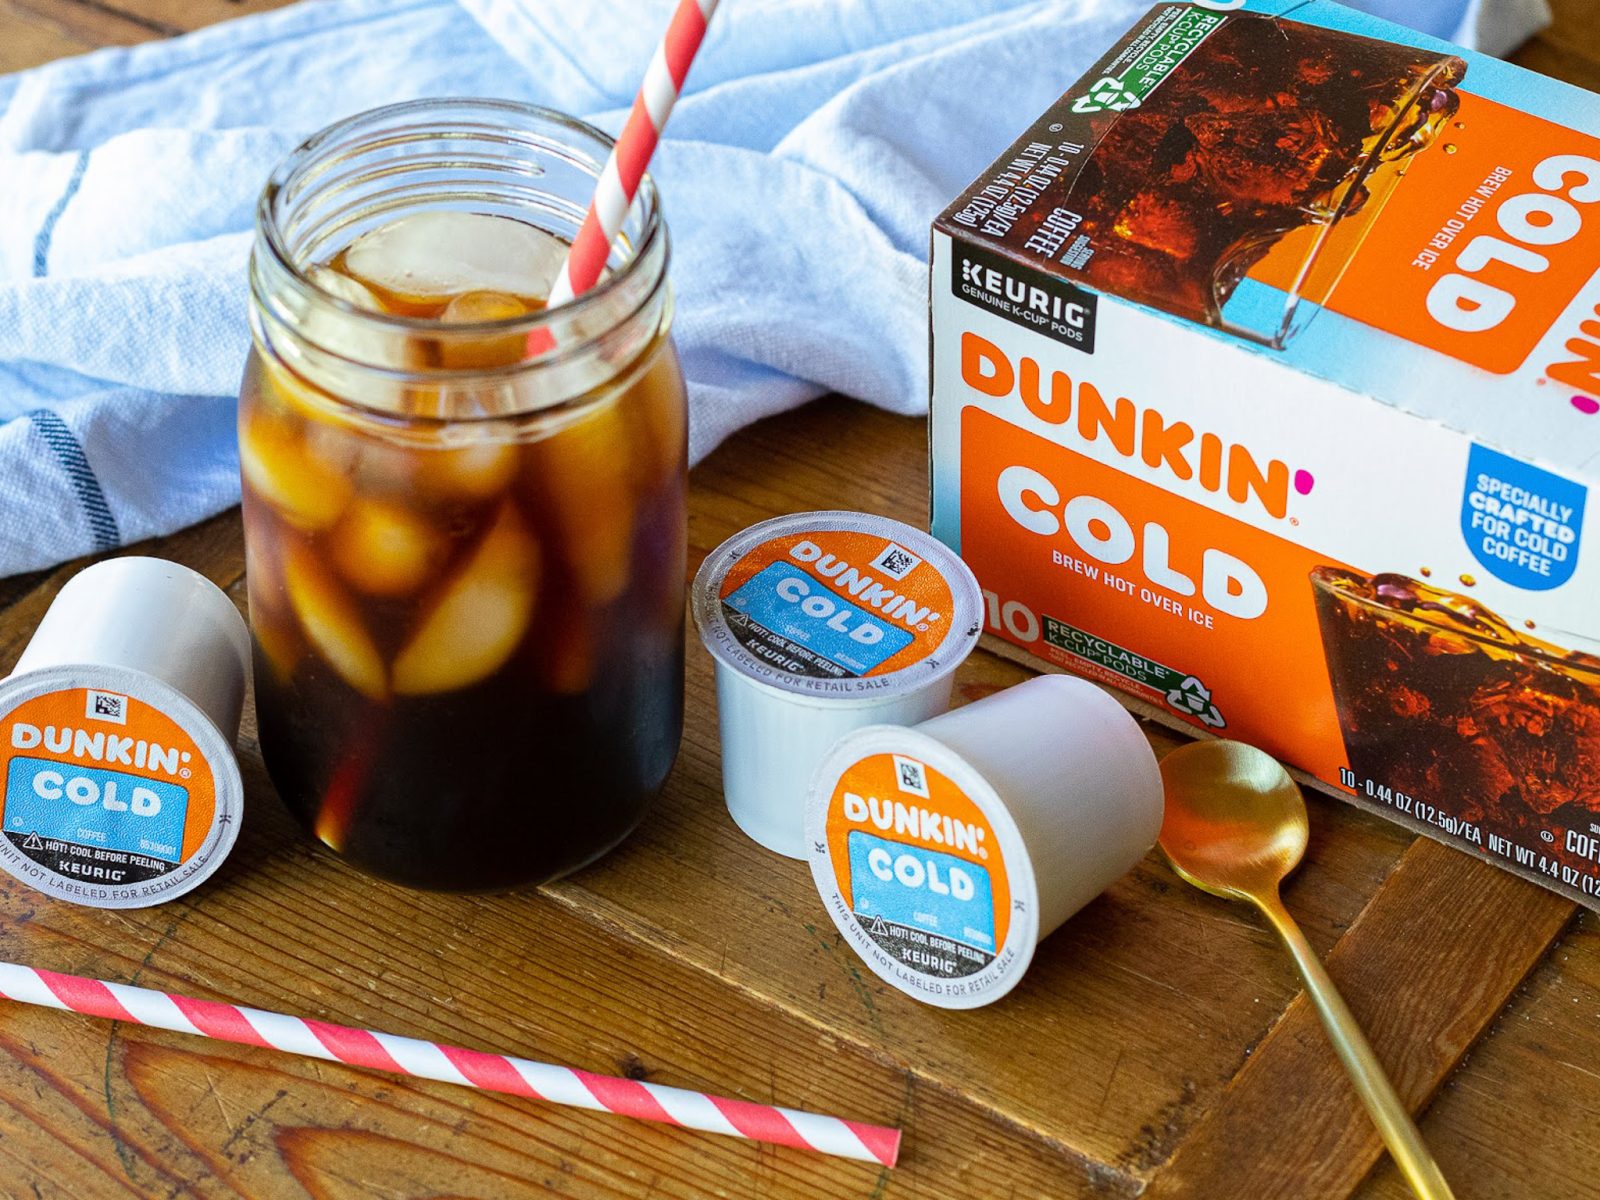 Dunkin’ Donuts Cold Coffee Products Are As Low As $4.49 At Kroger – Half Price